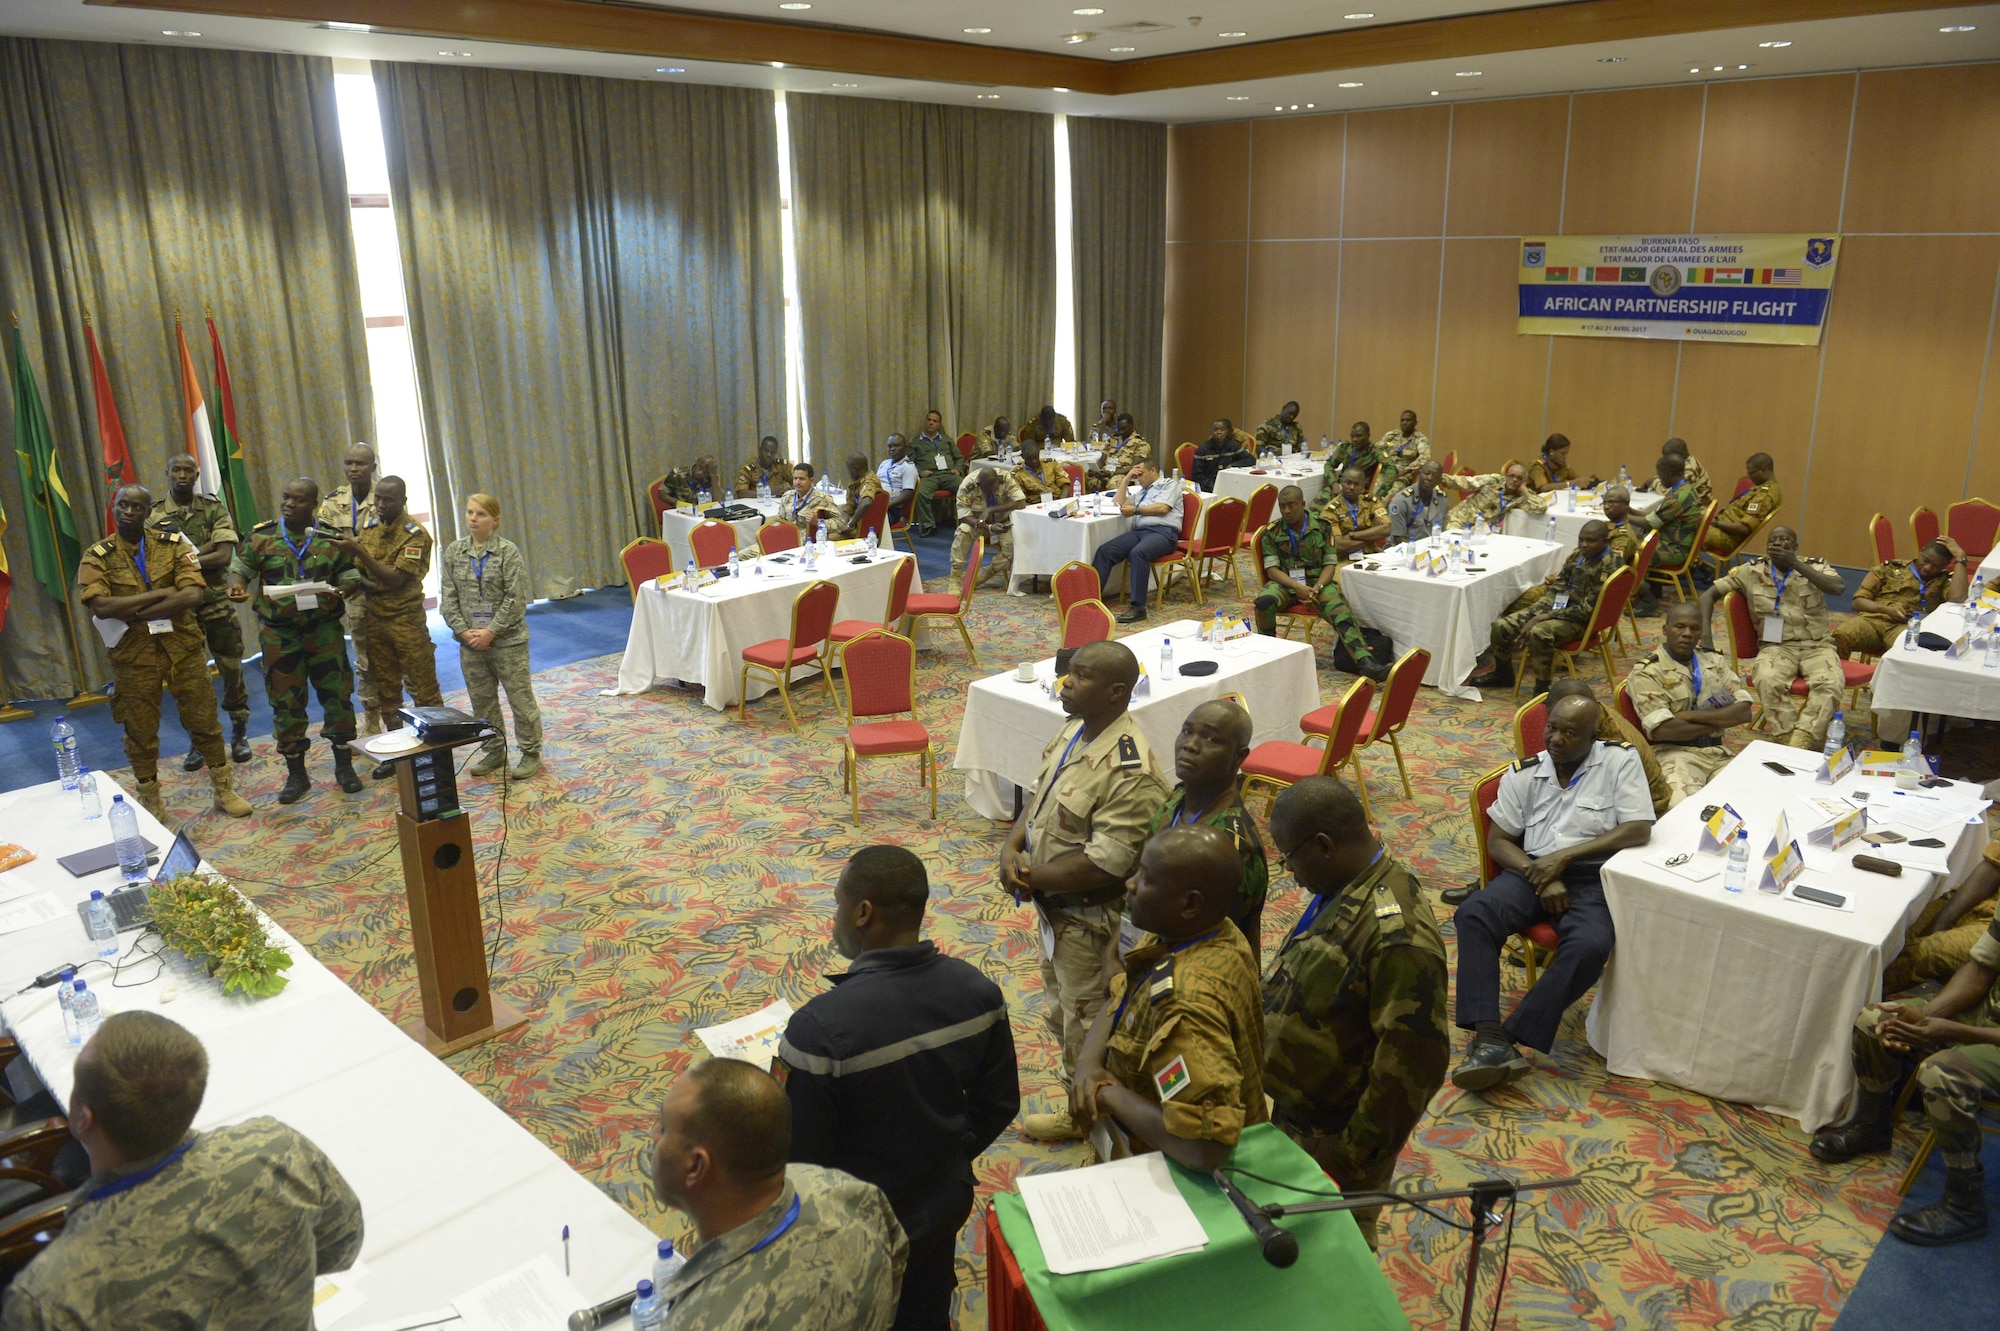 African Partnership Flight participants discuss their solutions to a humanitarian assistance and disaster relief scenario in Ouagadougou, Burkina Faso, April 20, 2017. The intent of APF is to build strong transparent partnerships that enhance regional stability and security through formal alliances, partnerships and simple exchanges of information. (U.S. Air Force photo by Staff Sgt. Jonathan Snyder)